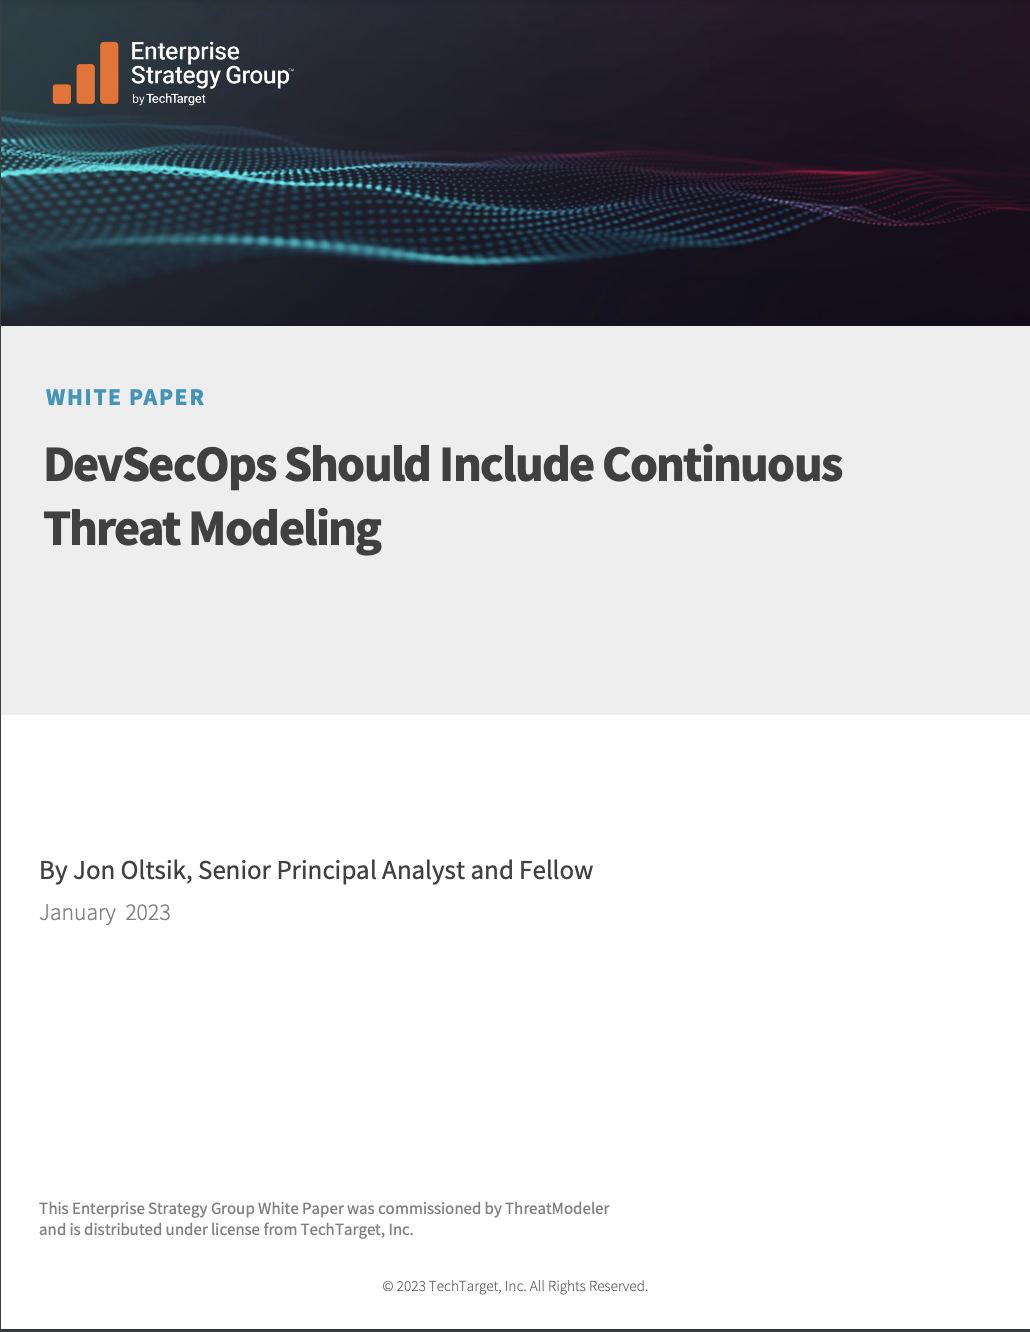 DevSecOps DEVSECOPS SHOULD INCLUDE CONTINUOUS THREAT MODELING By Jon Oltsik, Senior Principal Analyst and Fellow